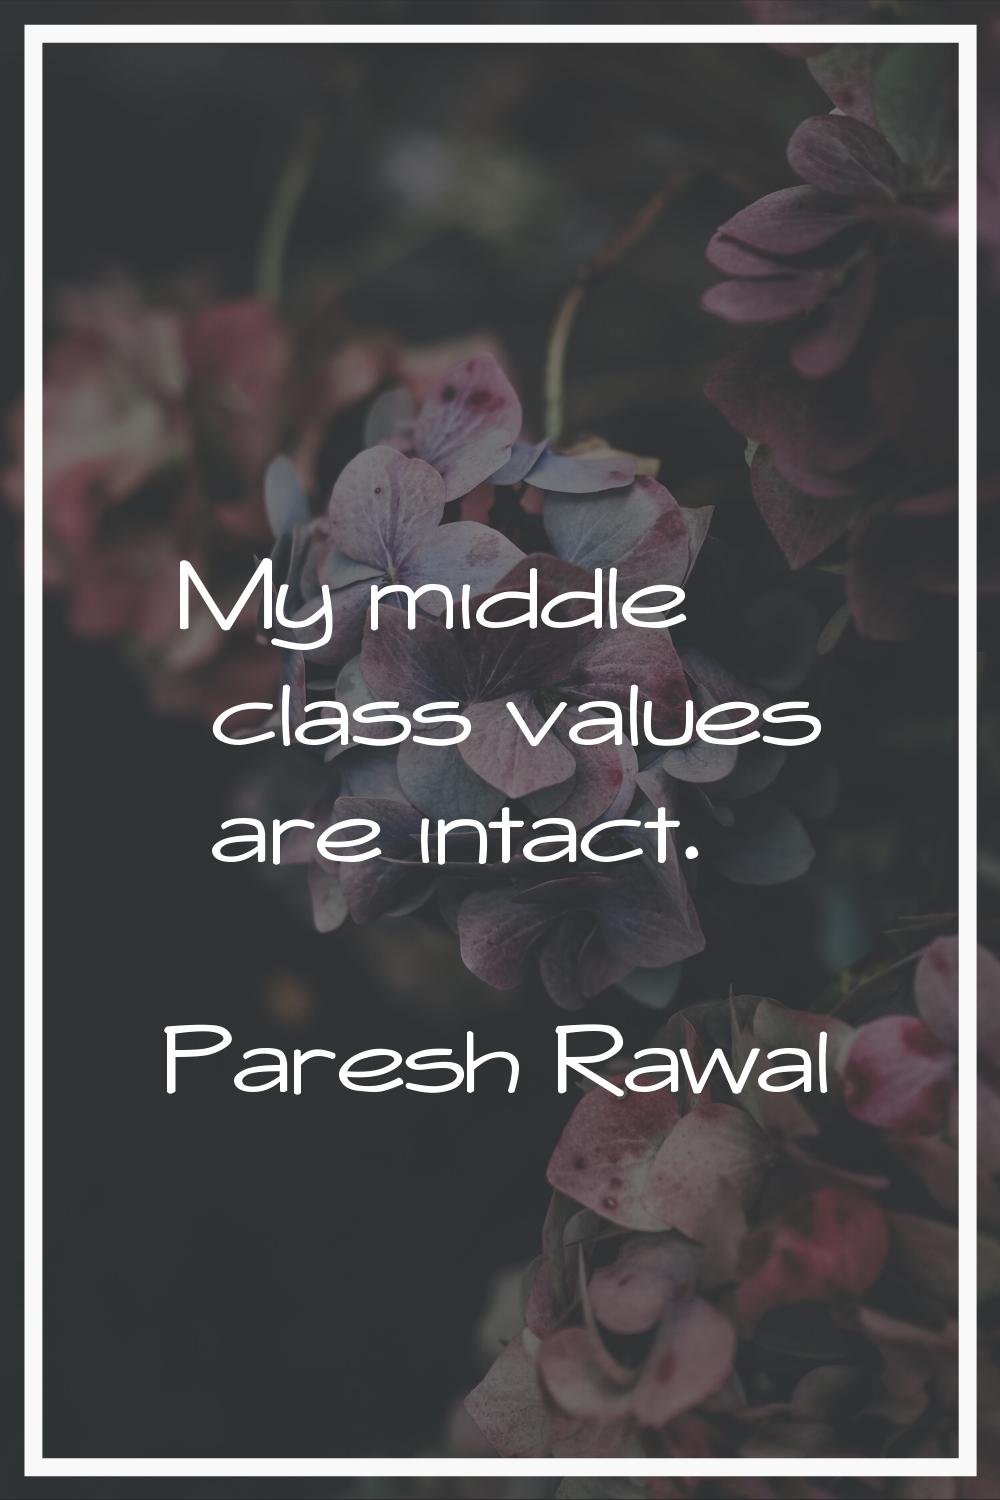 My middle class values are intact.